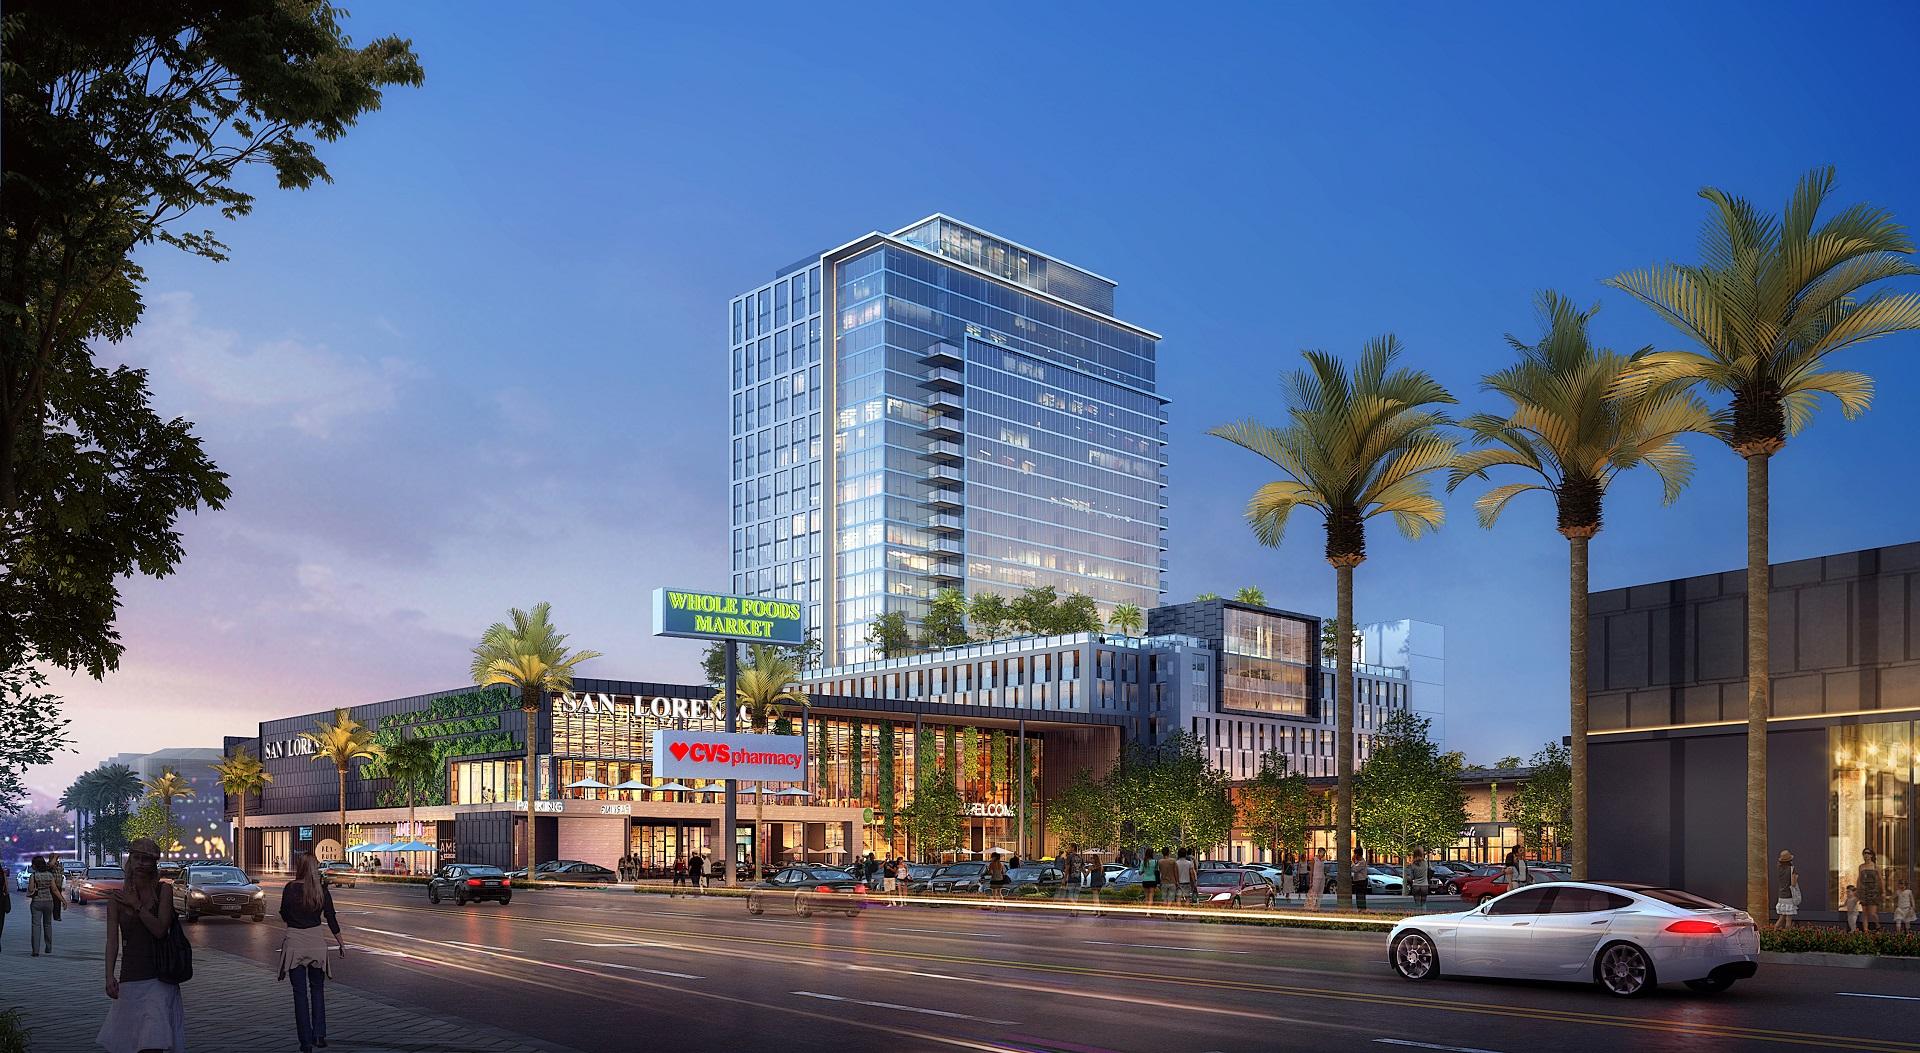 LA's Next Massive Food Hall Lands in the Center of Beverly Grove